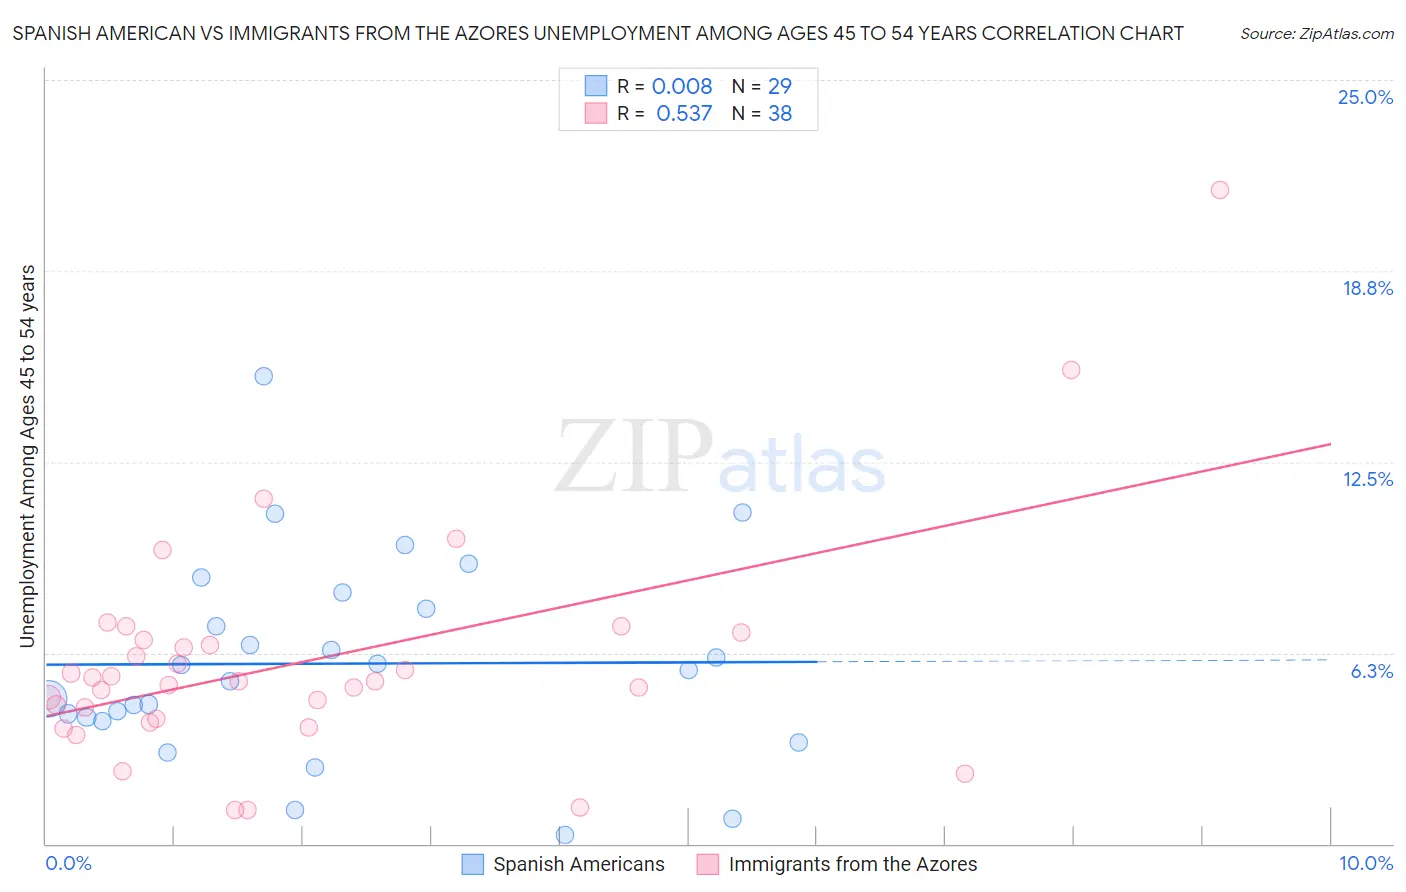 Spanish American vs Immigrants from the Azores Unemployment Among Ages 45 to 54 years